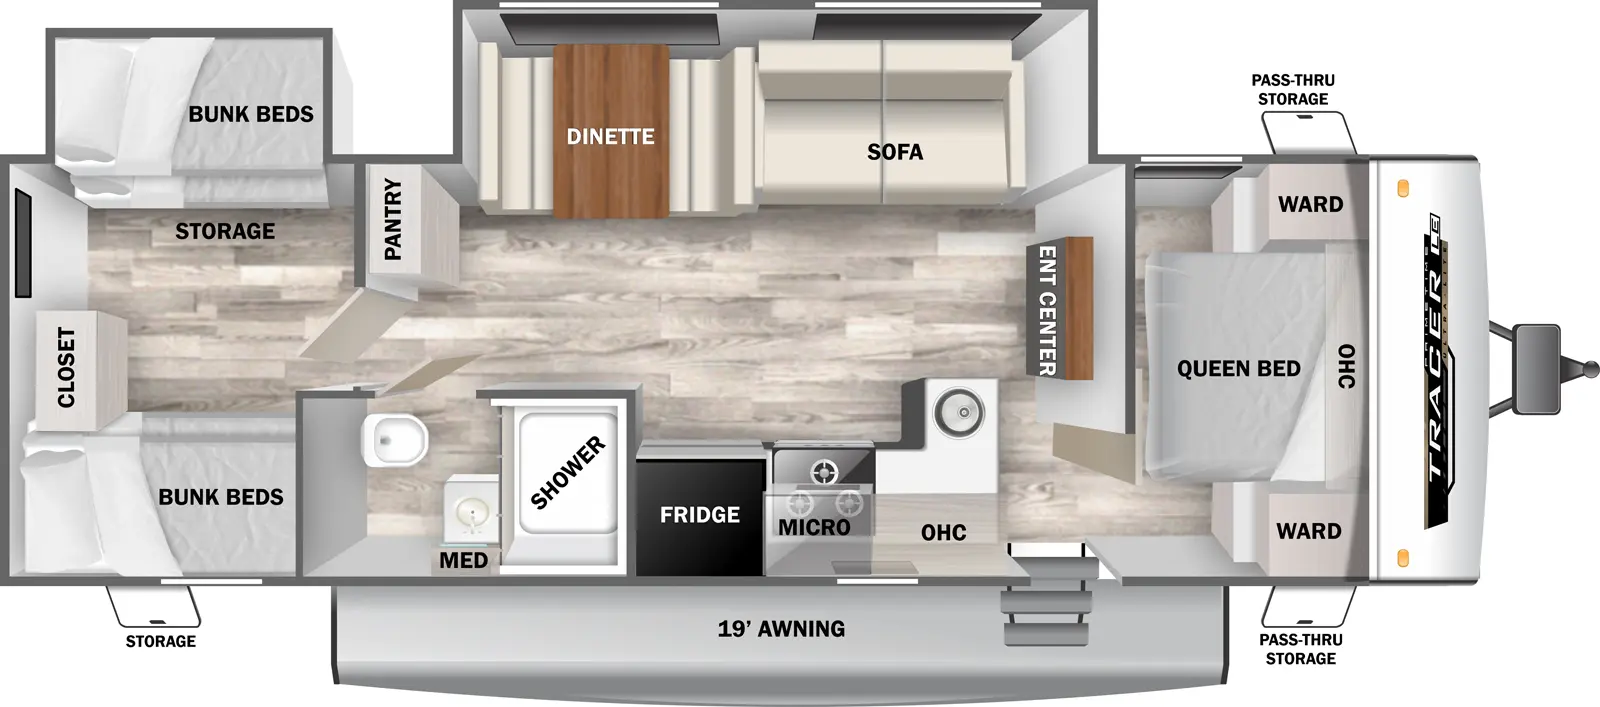 The 308BRDLE has two slideouts and one entry. Exterior features front pass-thru storage, 19 foot awning, and rear storage. Interior layout front to back: foot-facing queen bed with overhead cabinet and wardrobes on each side; entertainment center along inner wall; off-door side slideout with sofa and dinette, and a pantry; door side entry, peninsula kitchen counter with sink, overhead cabinet, microwave, cooktop, refrigerator, and full bathroom with medicine cabinet; rear bunk room with off-door side bunk bed slideout with storage, and door side bunk beds with rear closet.